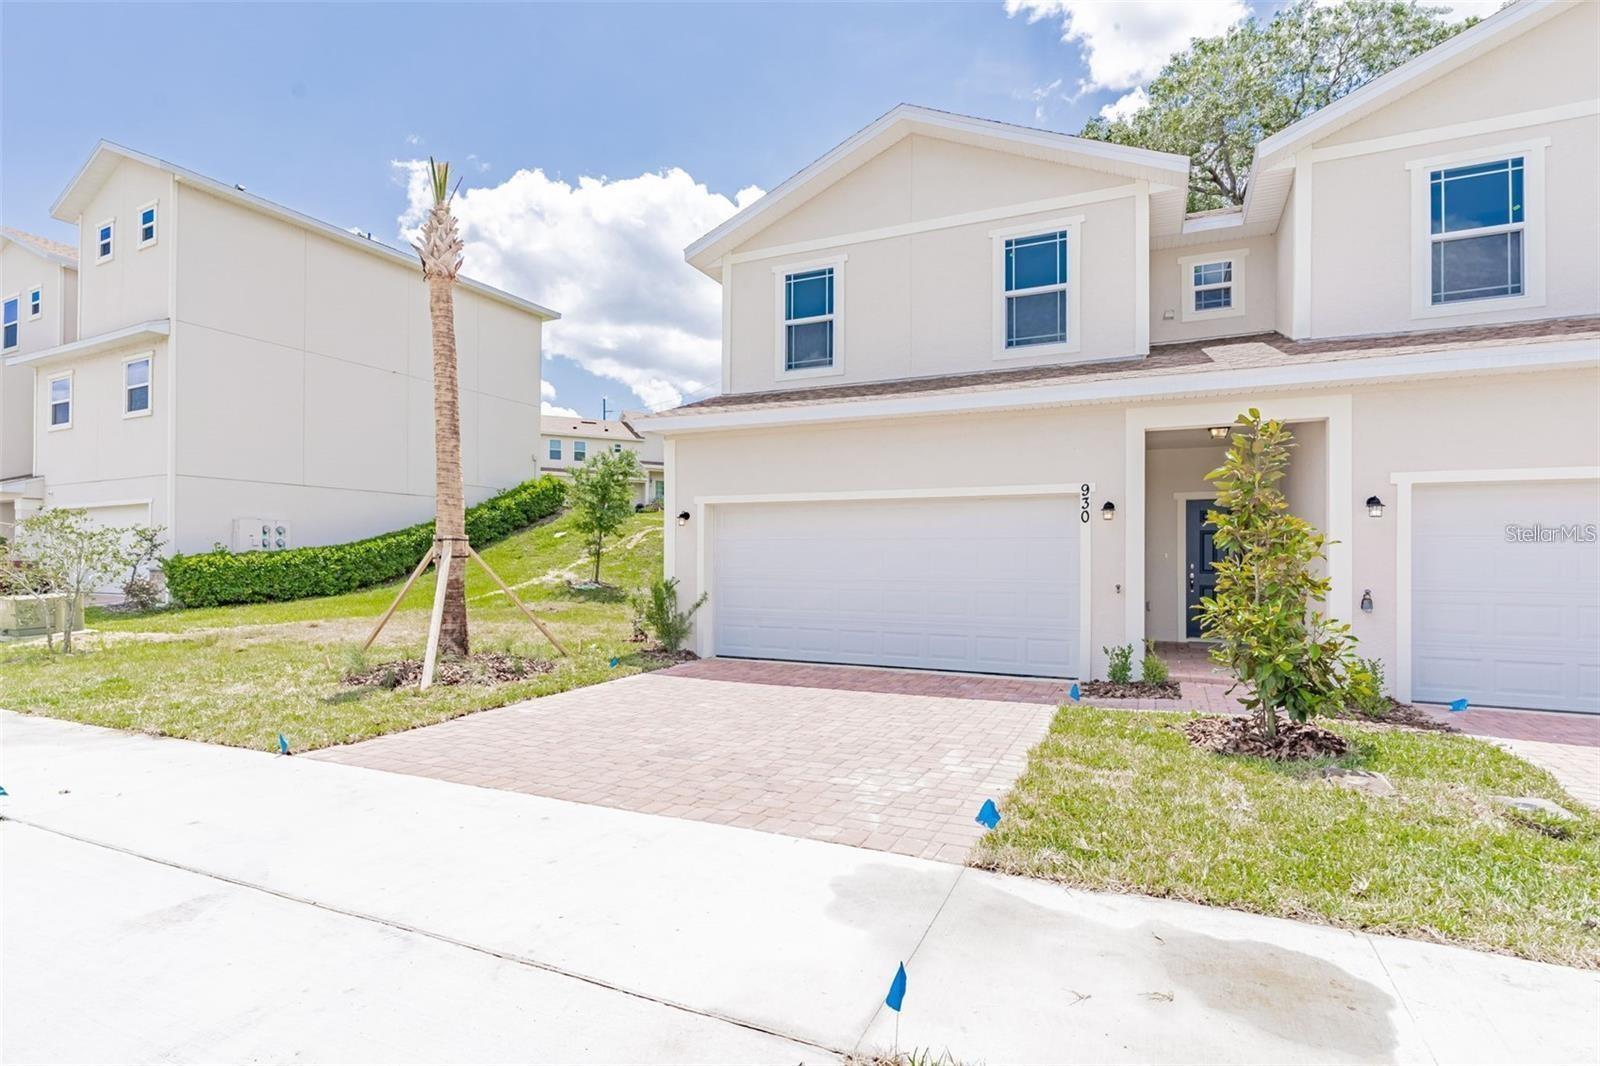 View CLERMONT, FL 34711 townhome